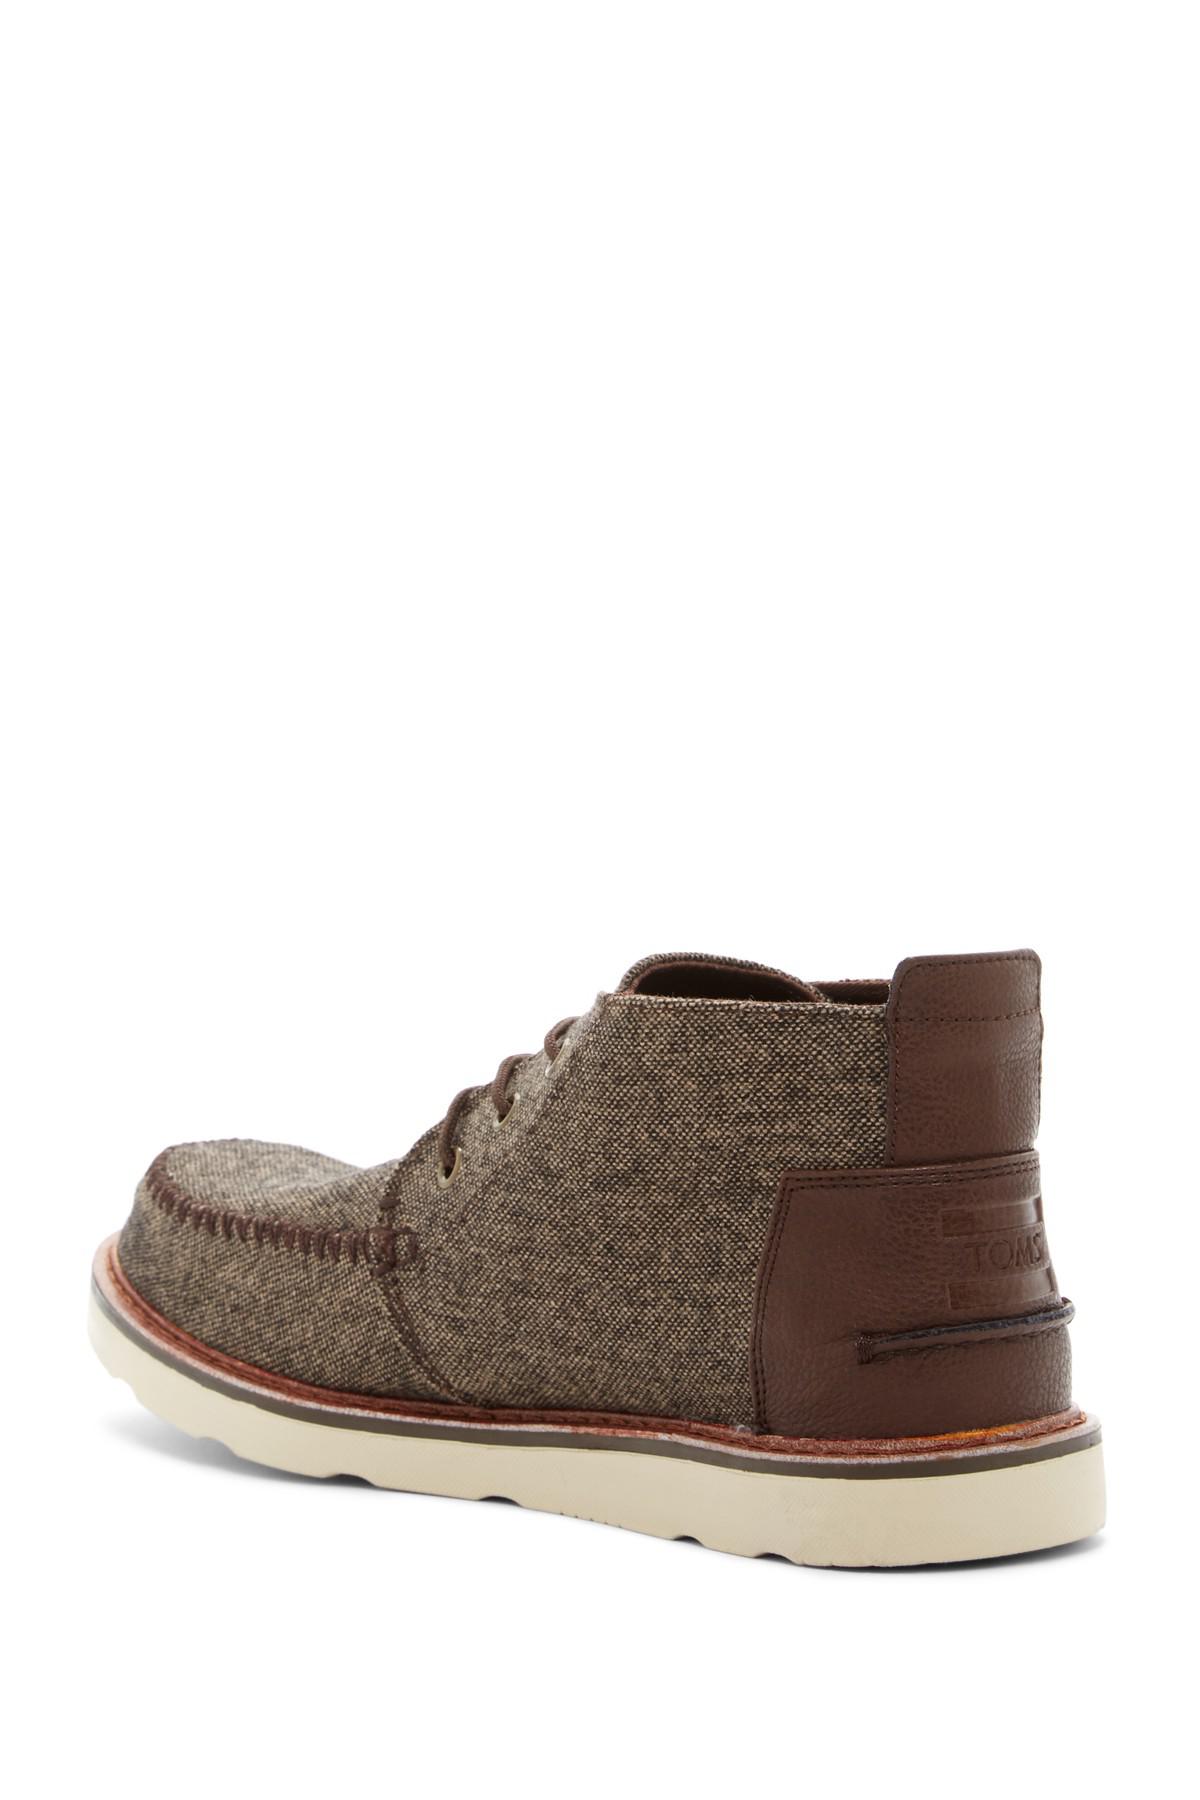 toms brushed wool chukka boot